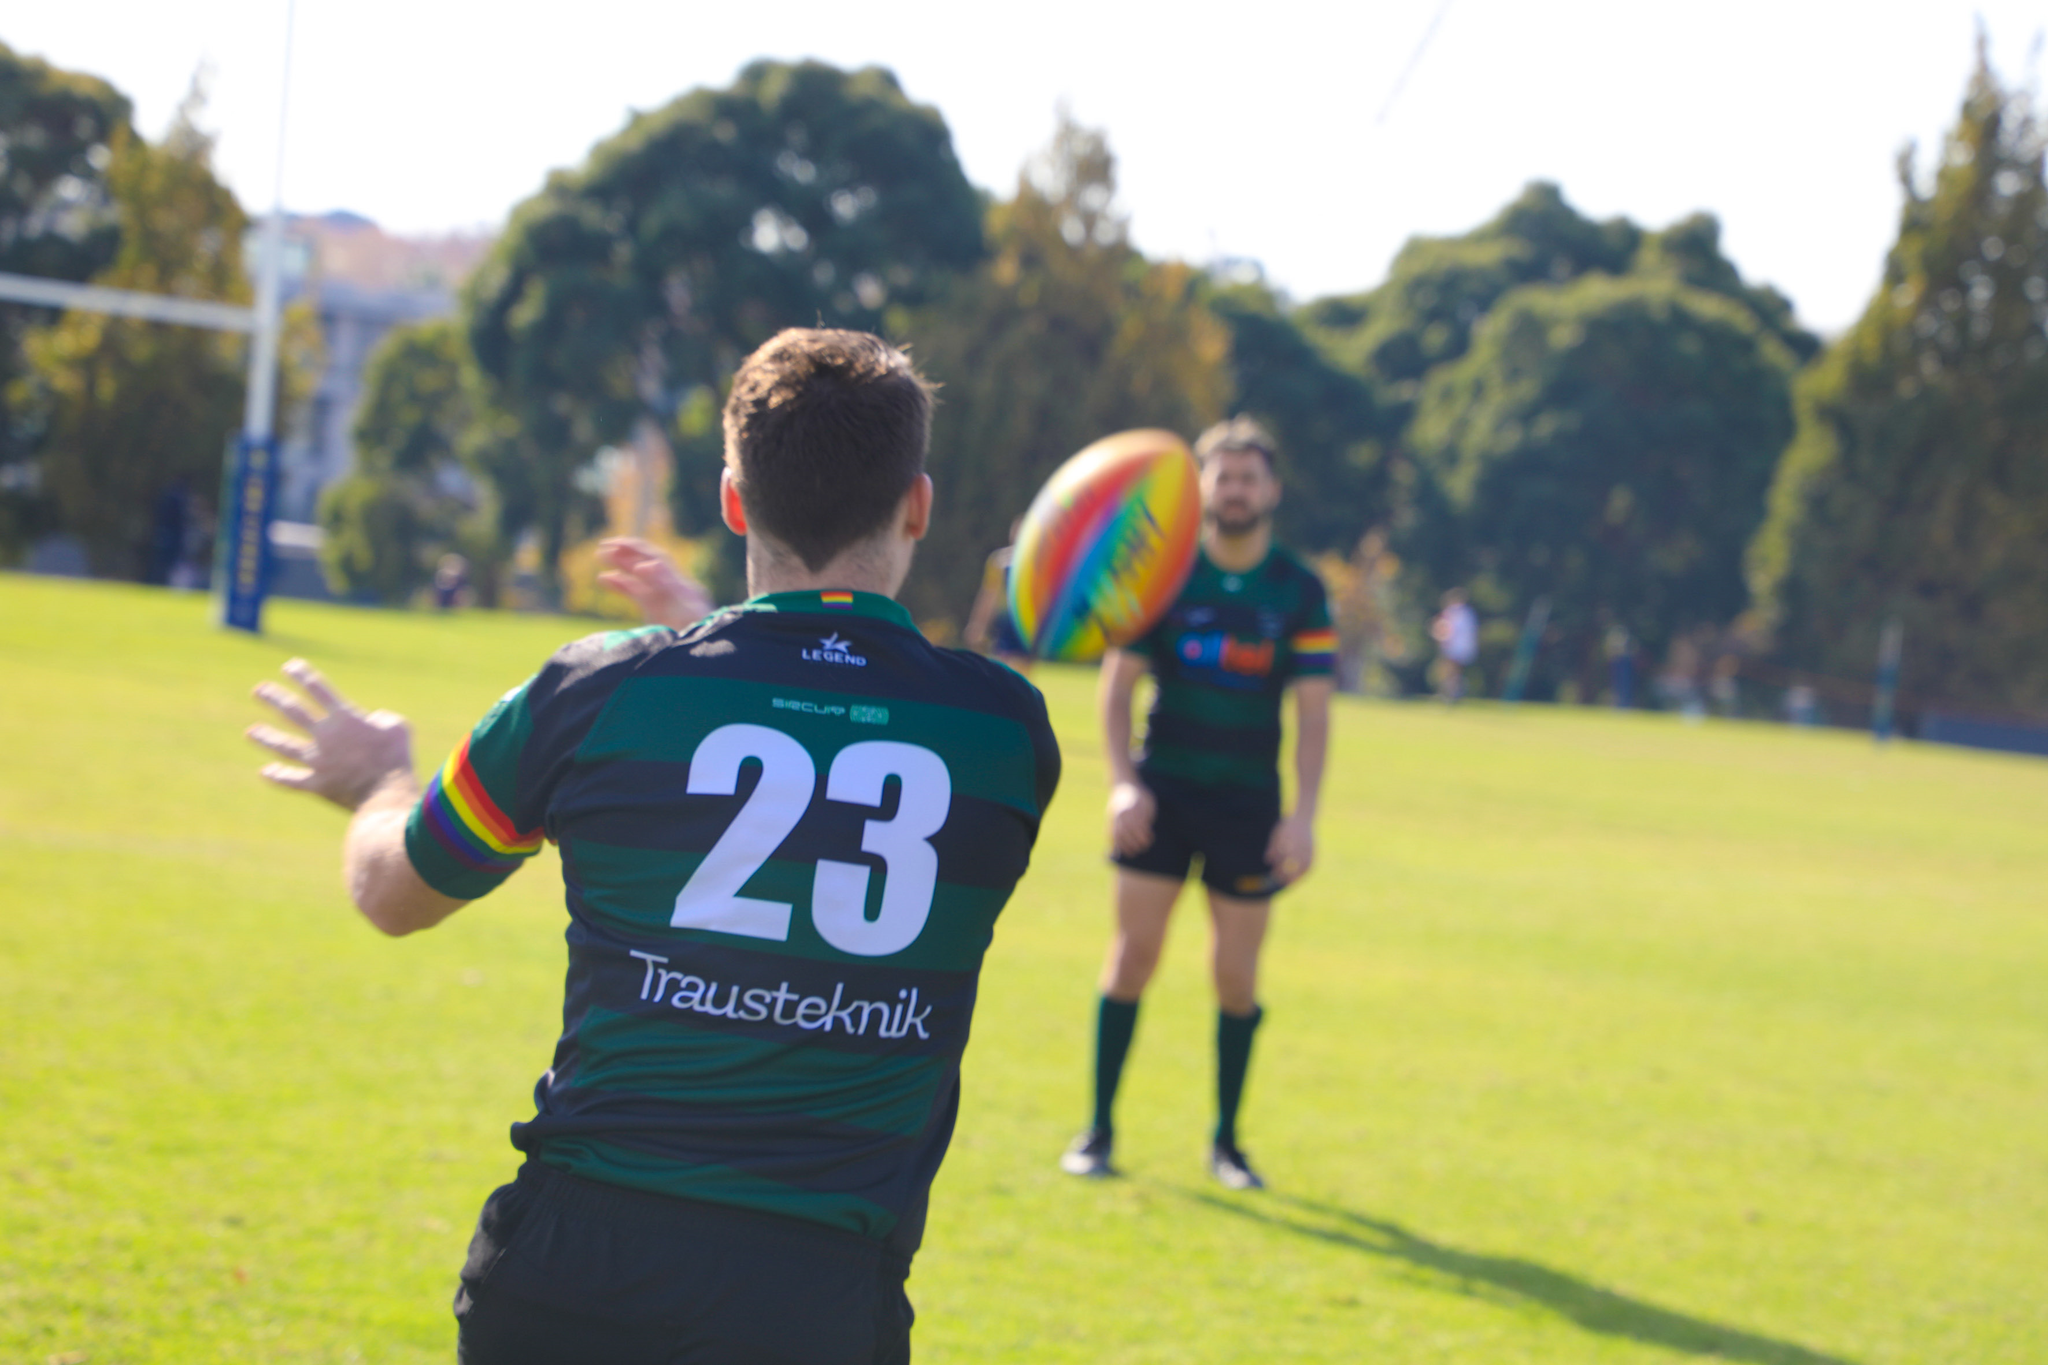 An Image of Melbourne Chargers Players passing a rainbow rugby ball.